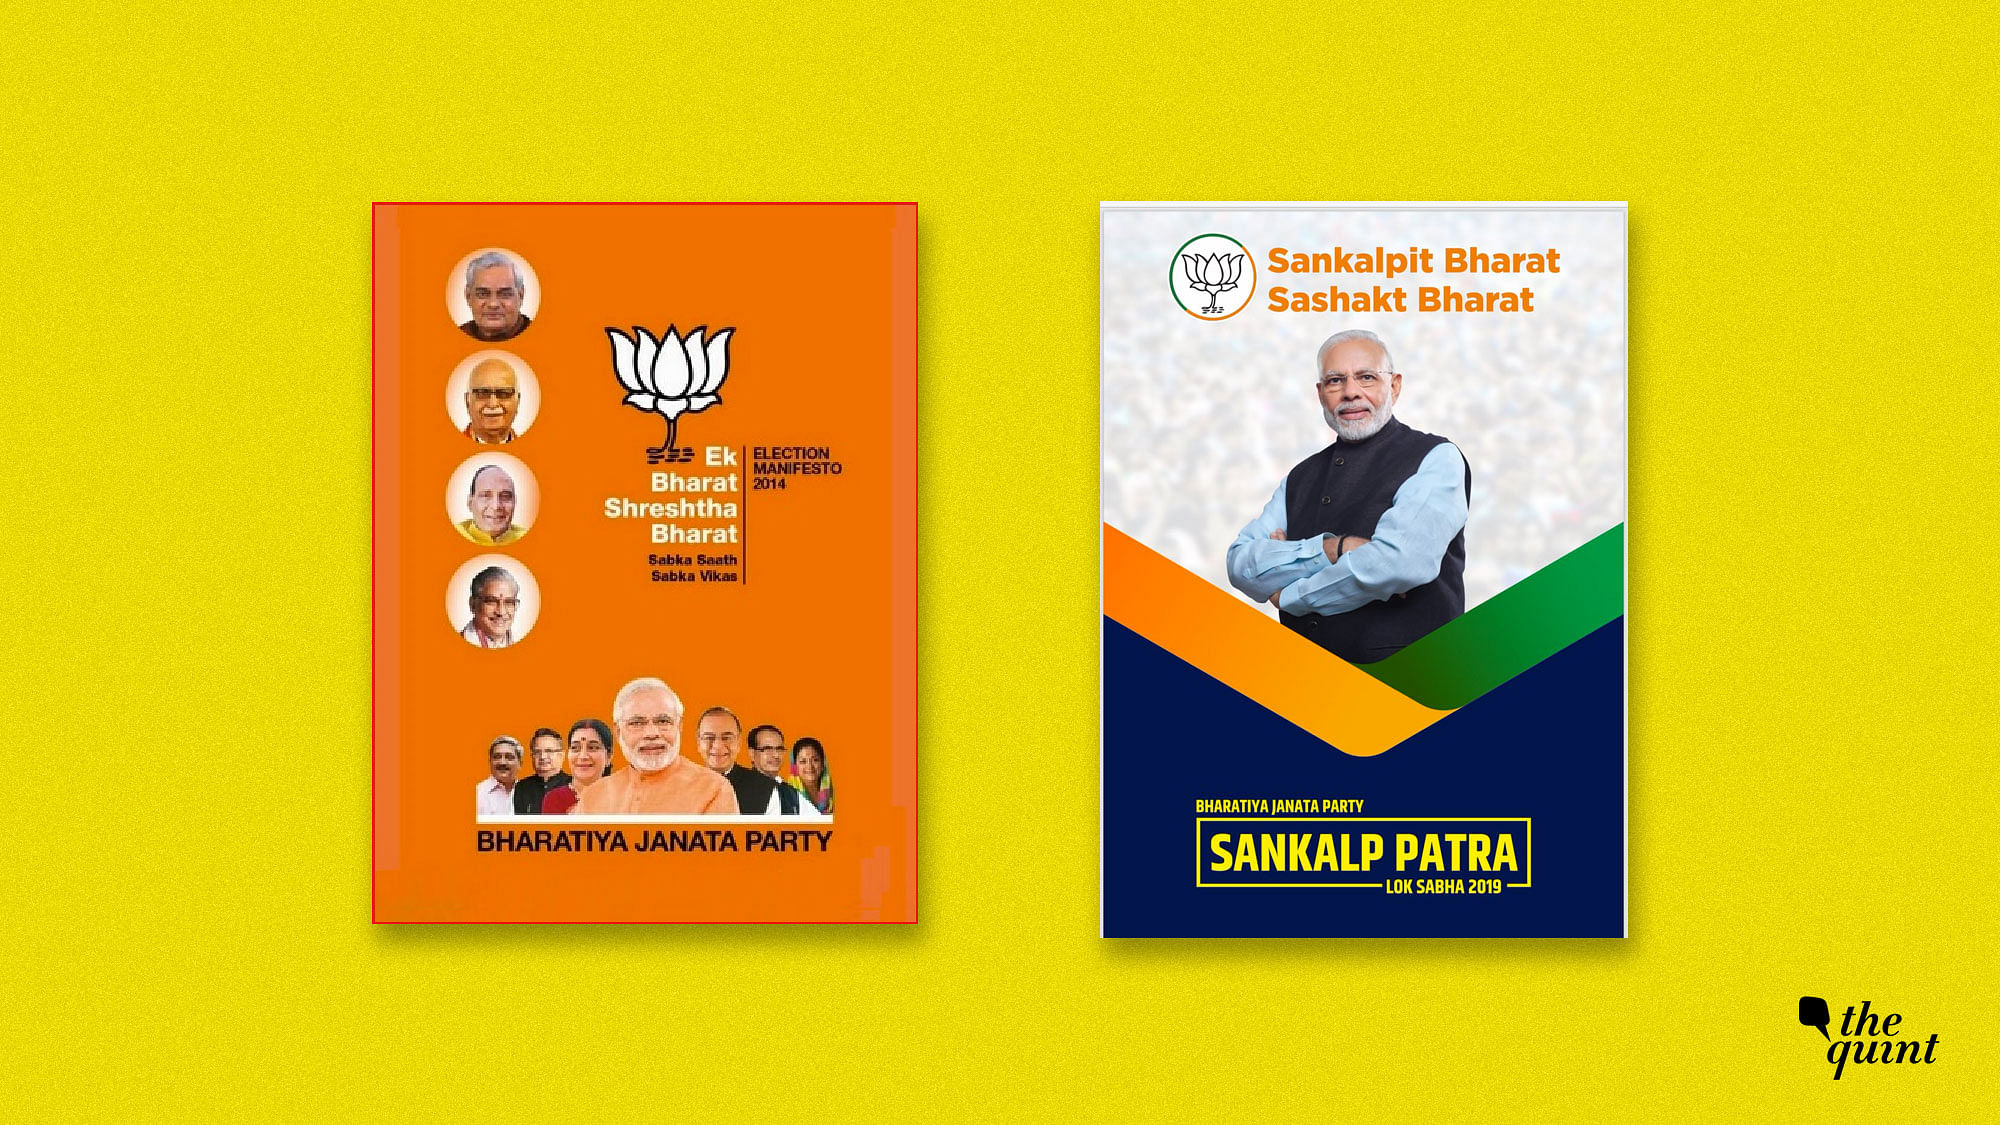 Here are 9 things that are strikingly different between the Bharatiya Janata Party’s manifesto in 2014 and now, in 2019.